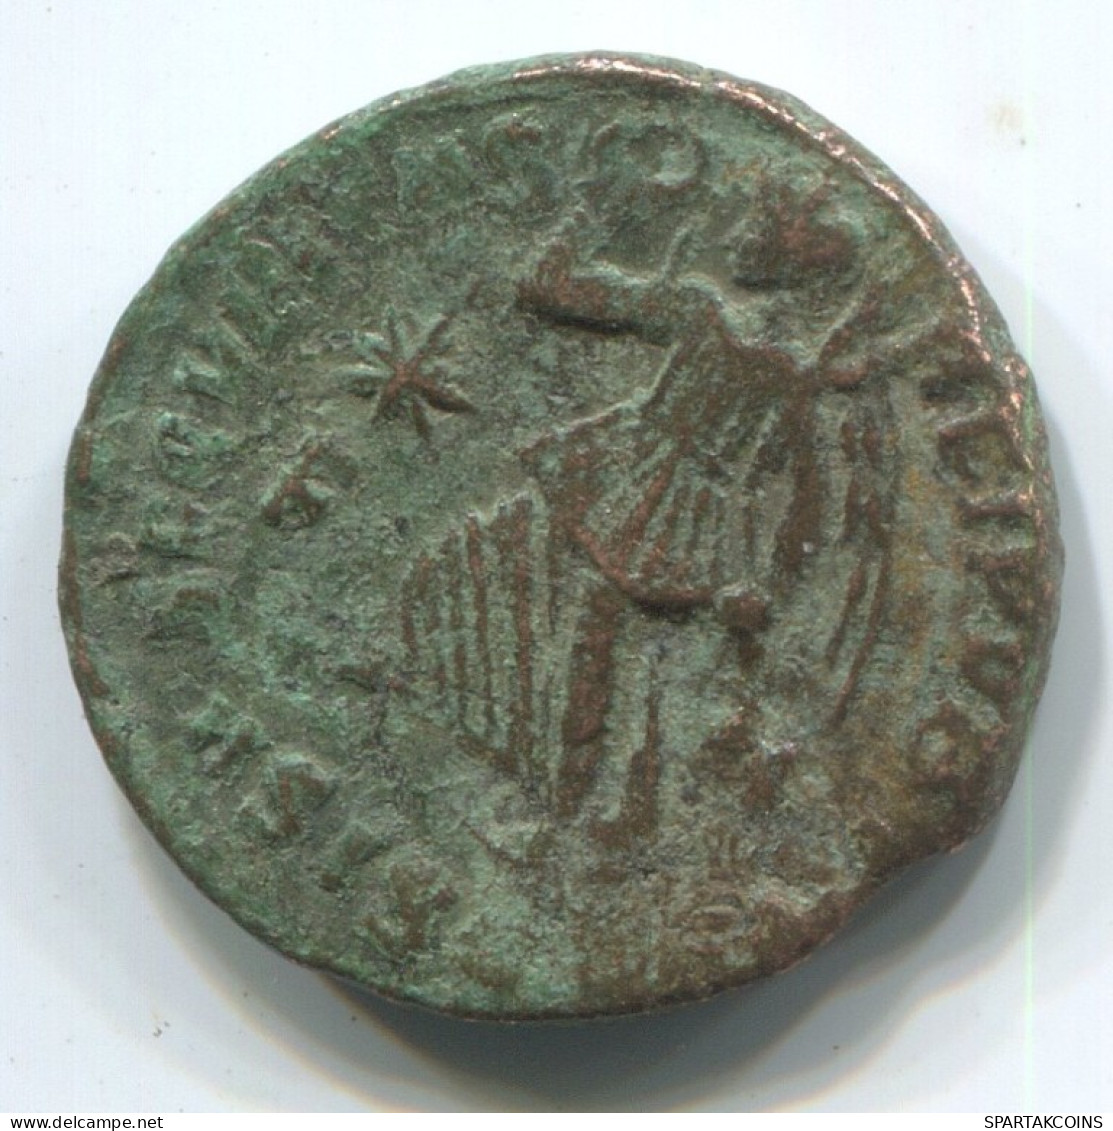 LATE ROMAN EMPIRE Follis Antique Authentique Roman Pièce 2.3g/17mm #ANT2120.7.F.A - The End Of Empire (363 AD To 476 AD)